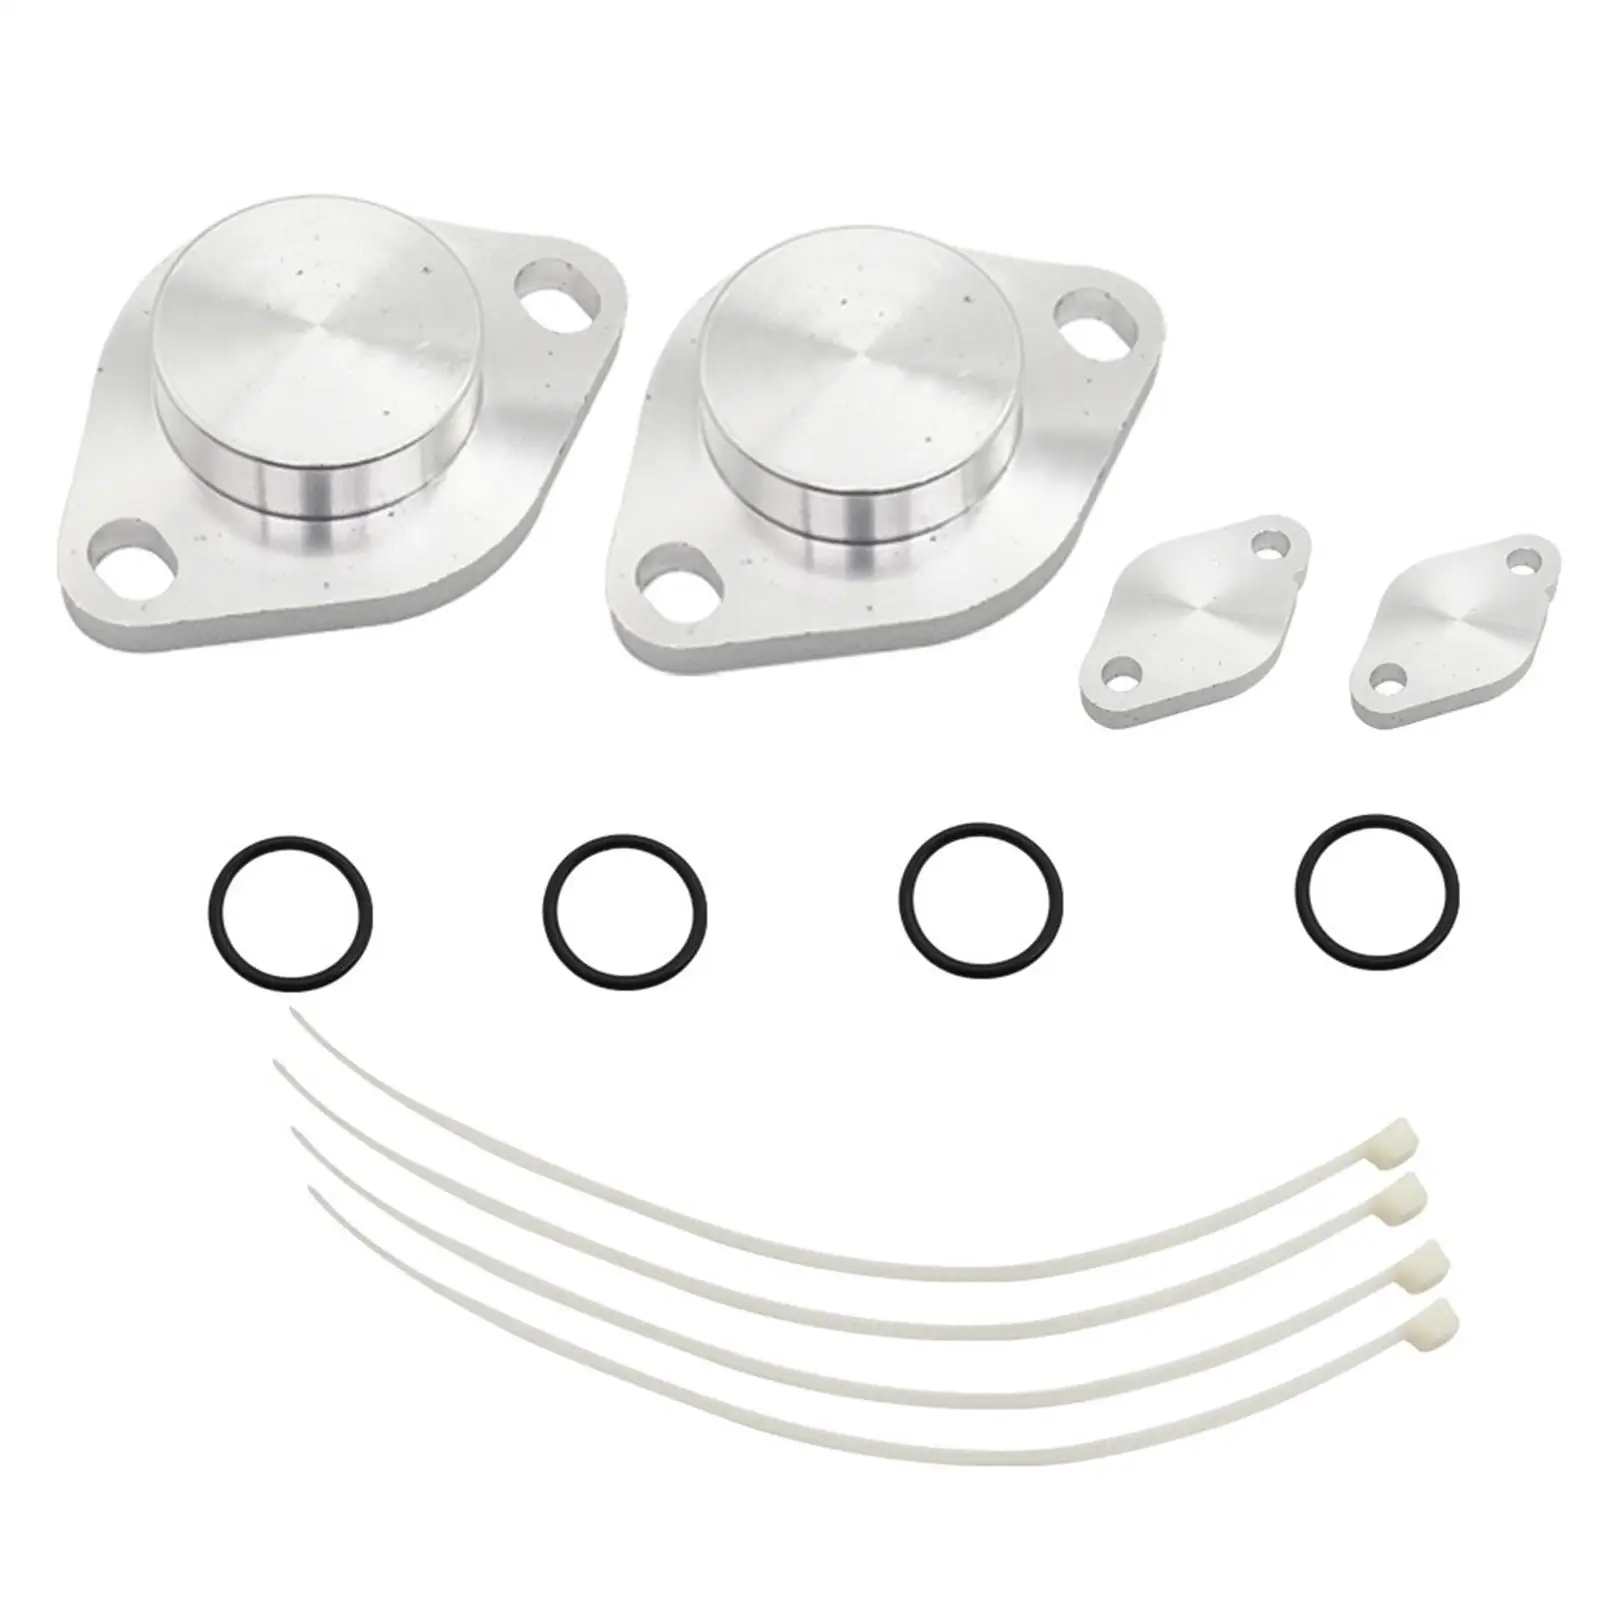 

Egr Removal Blanking Kit Removal Plates Blanking Kit for Discovery 3 for Sport S 2.7